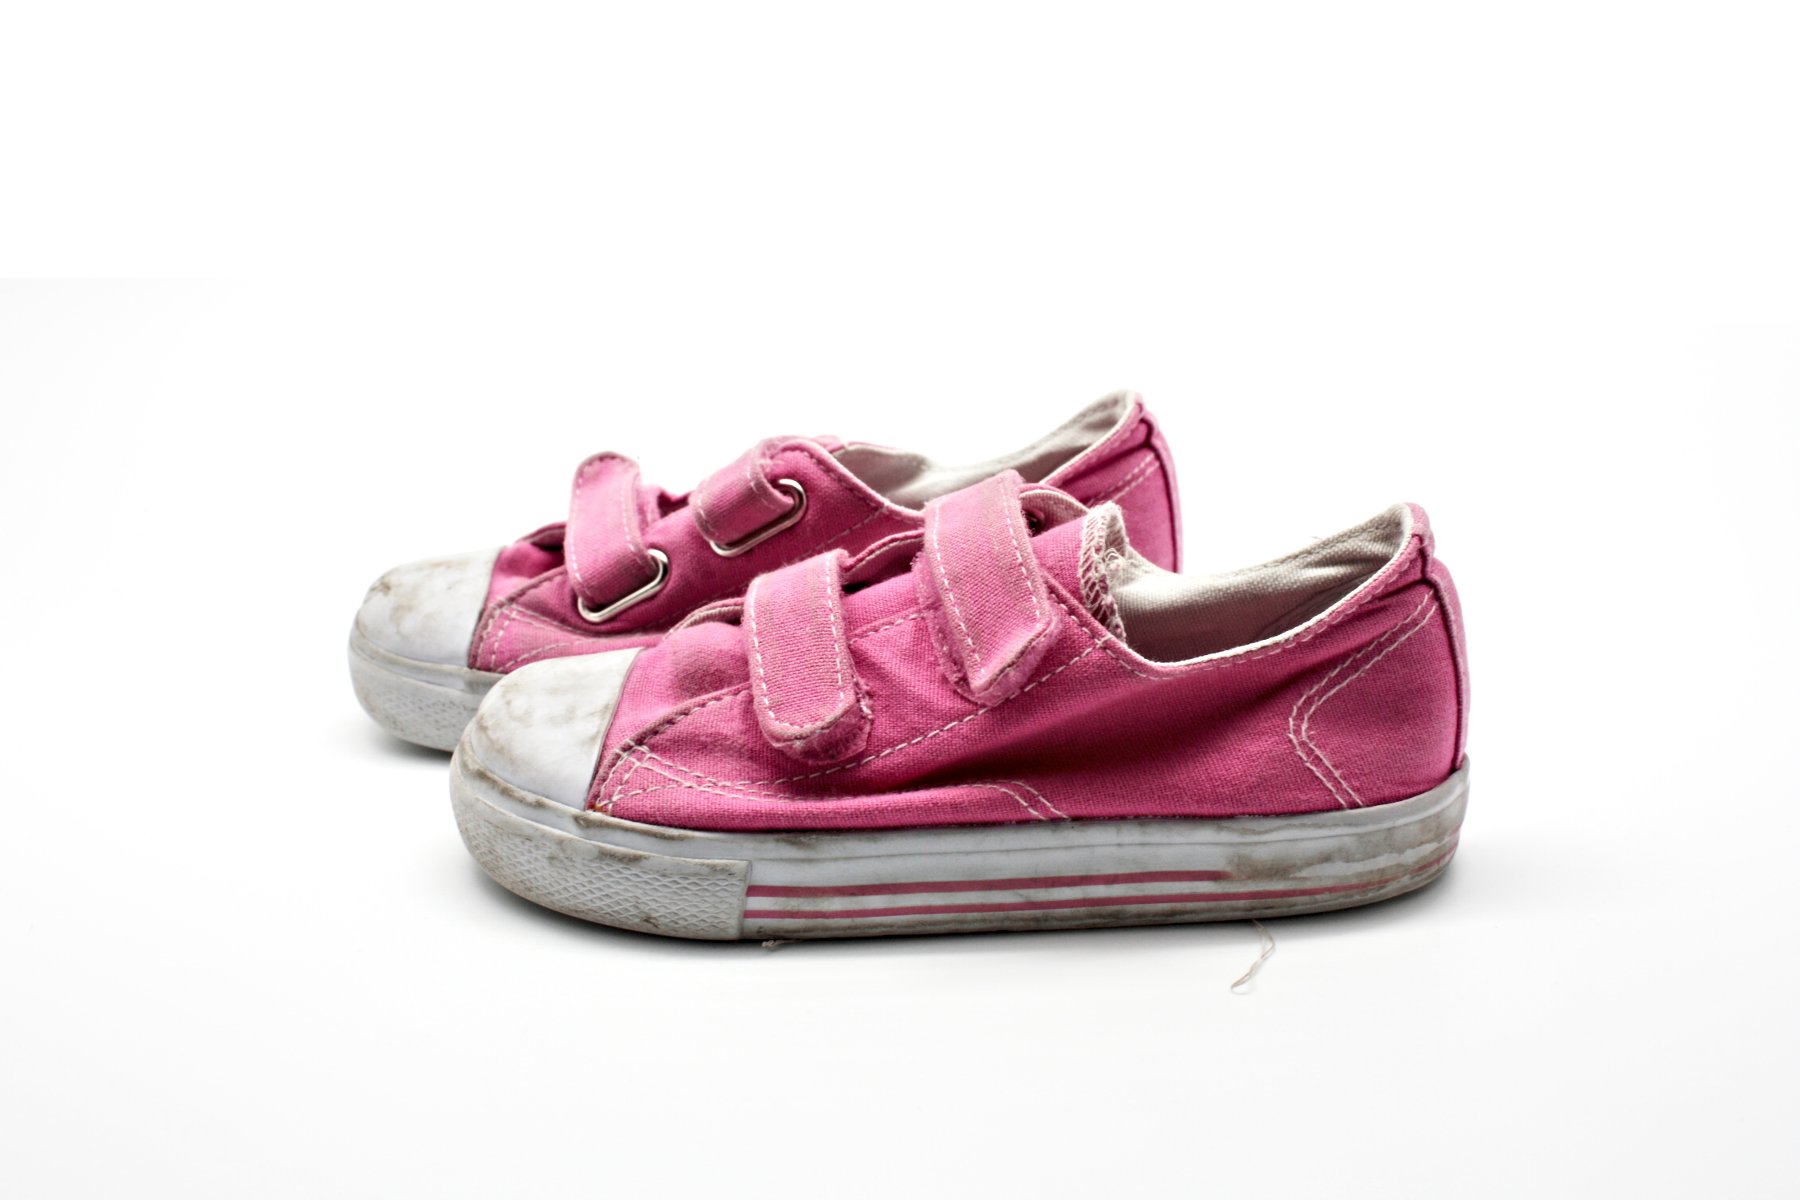 Old pink sneakers, Baby, Sneaker, New, Old, HQ Photo